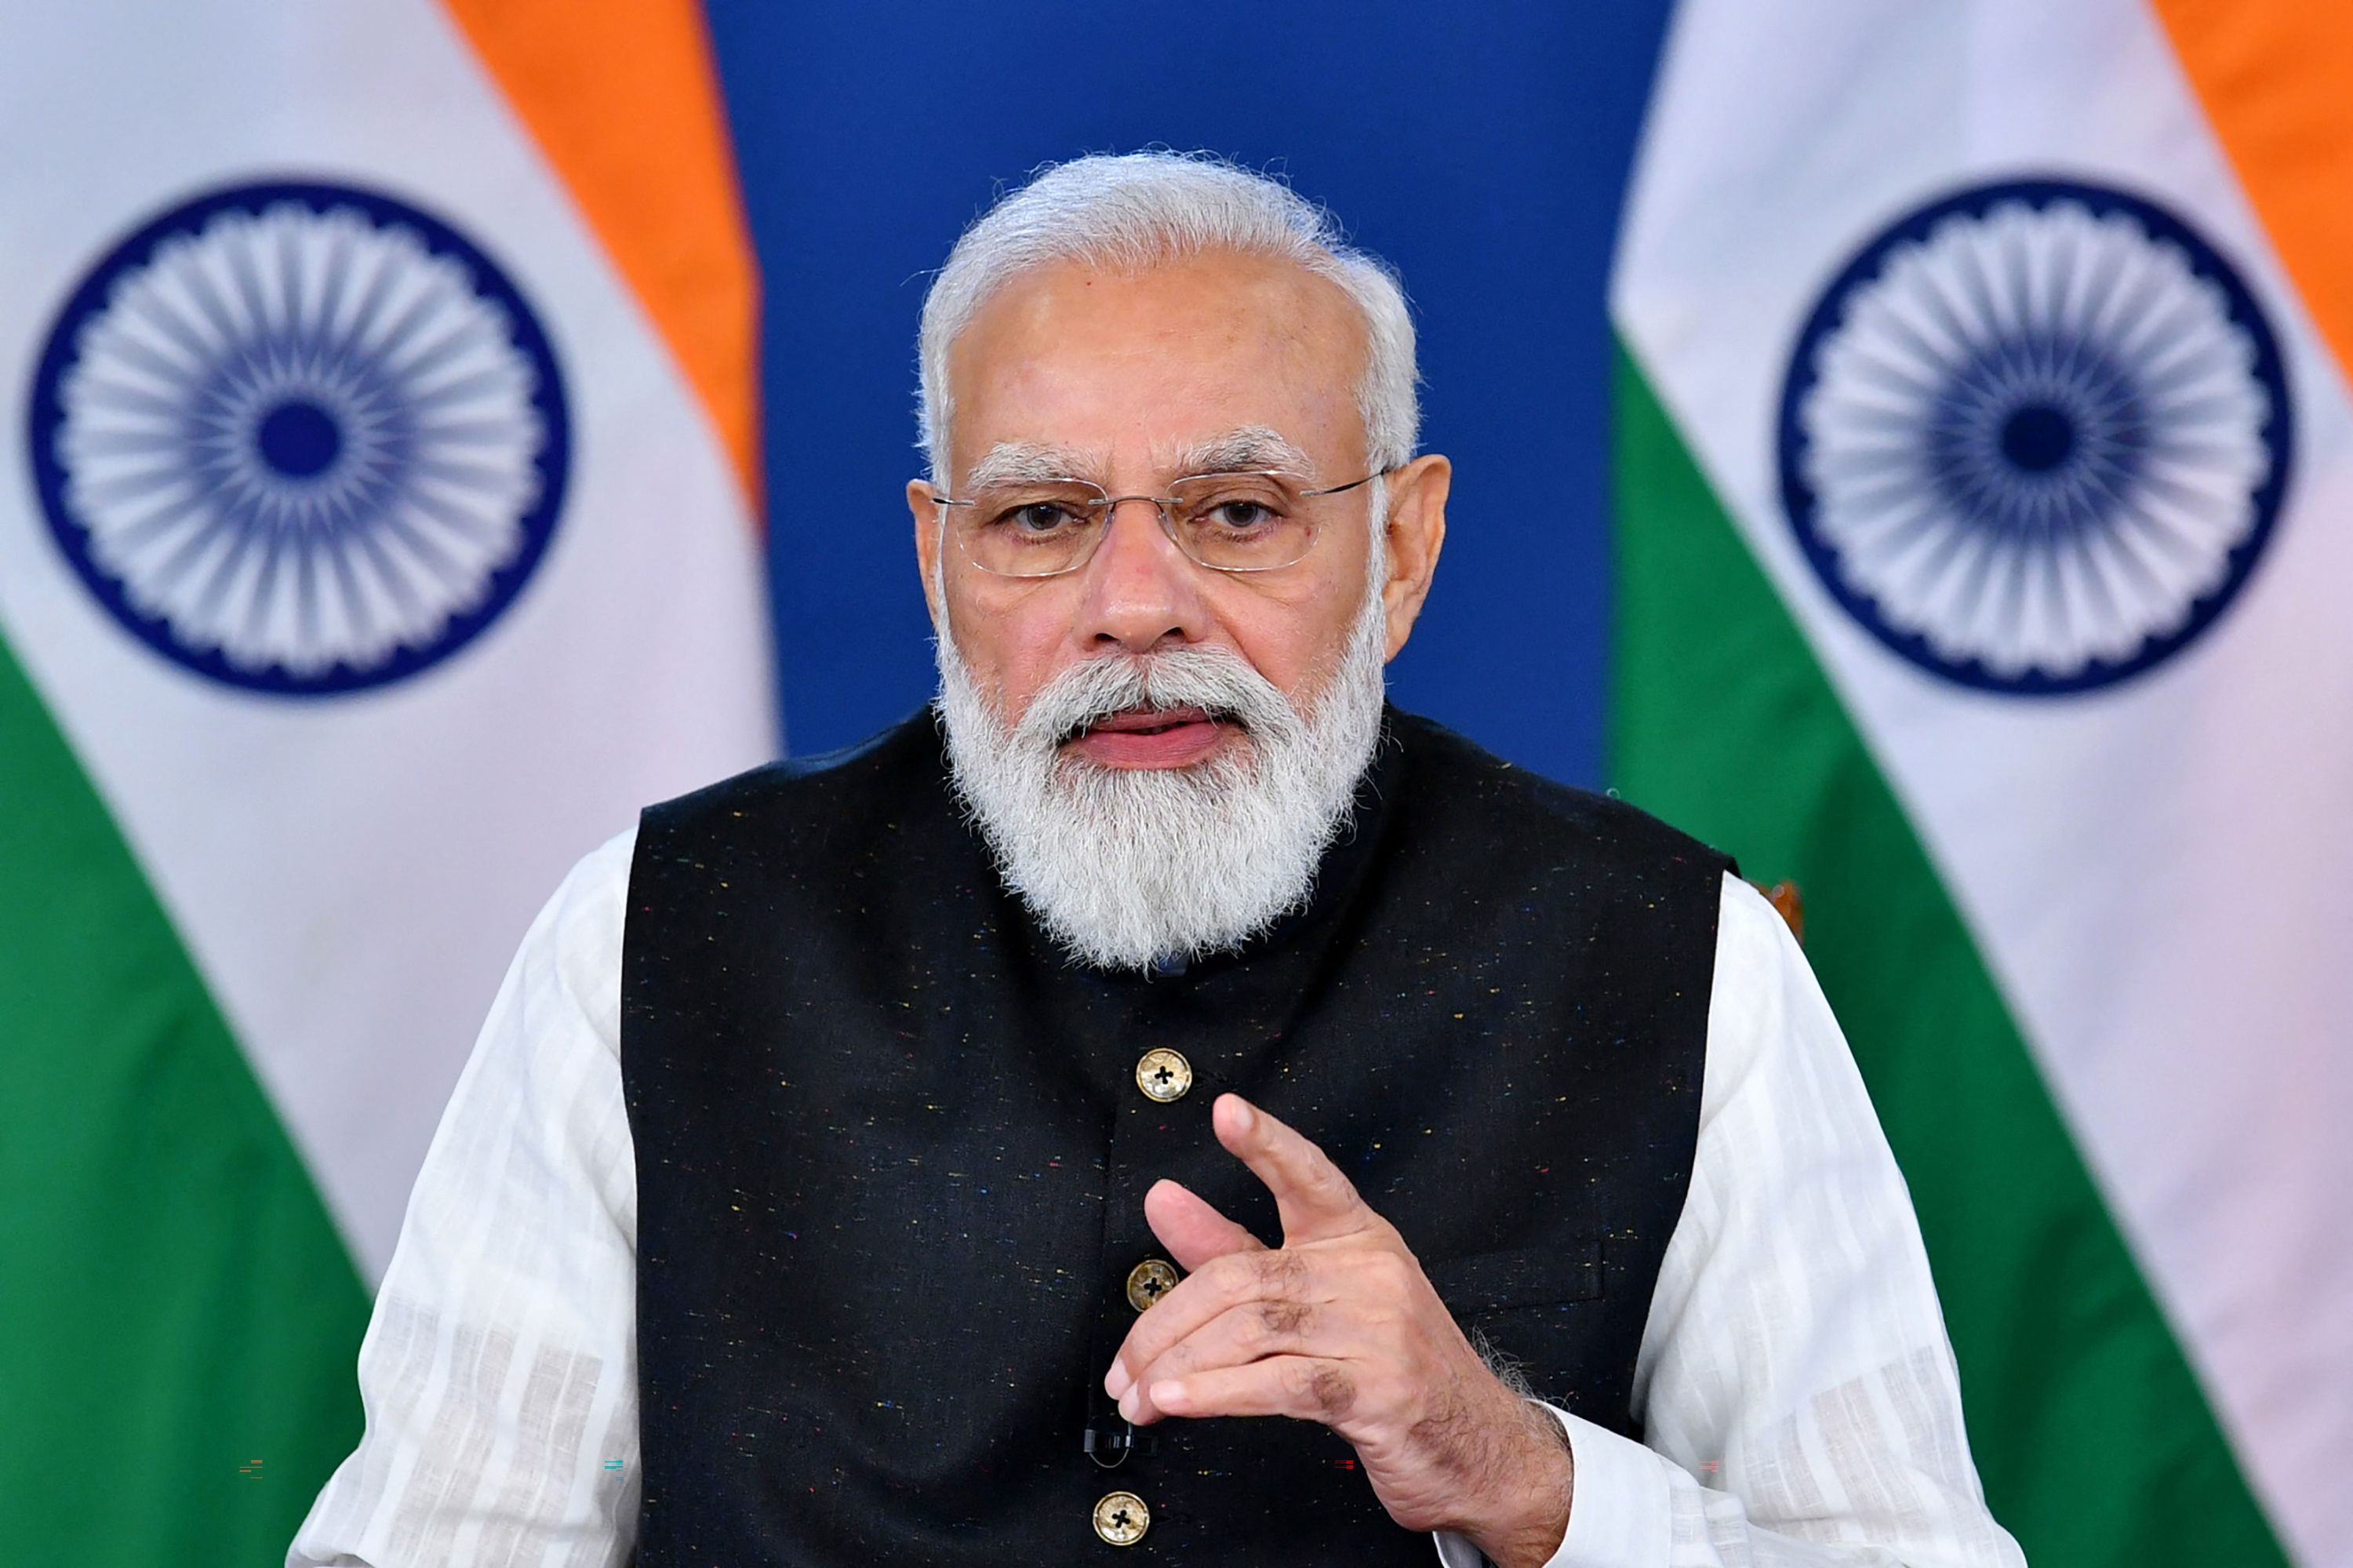 The prime minister said the country is witnessing a silent revolution in the form of Digital India and no district should be left behind in this.